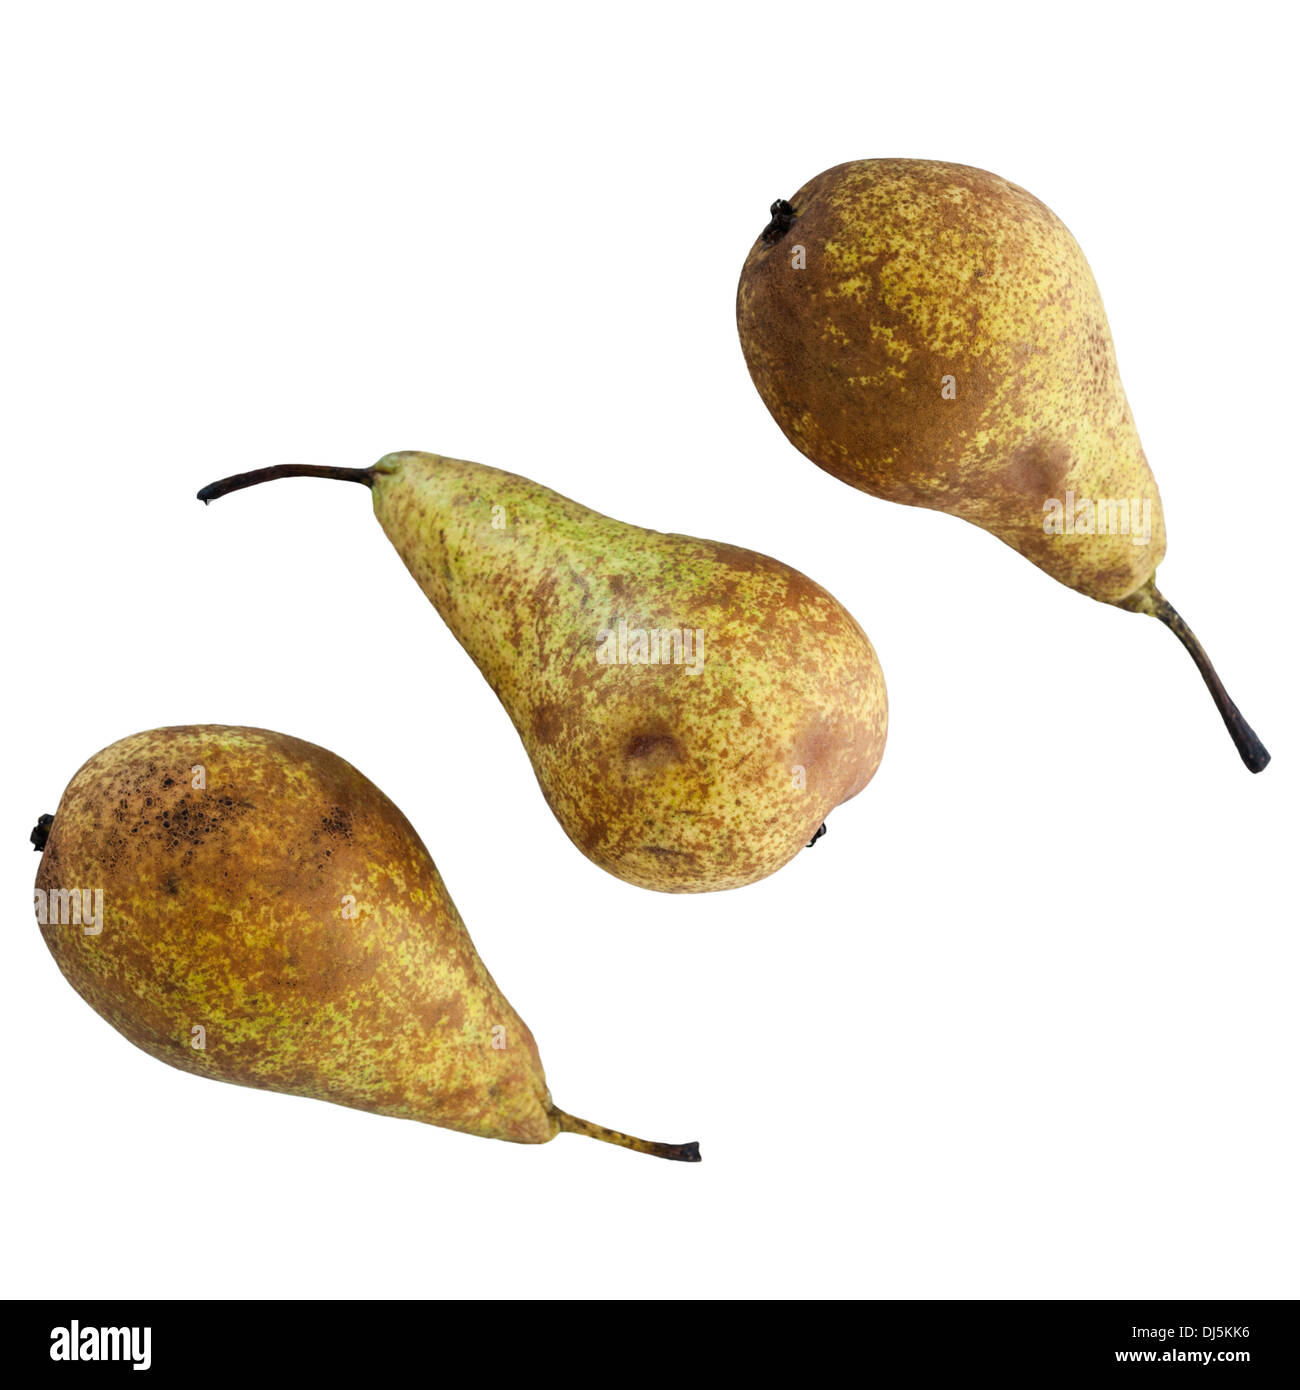 Three conference pears on a white background Stock Photo